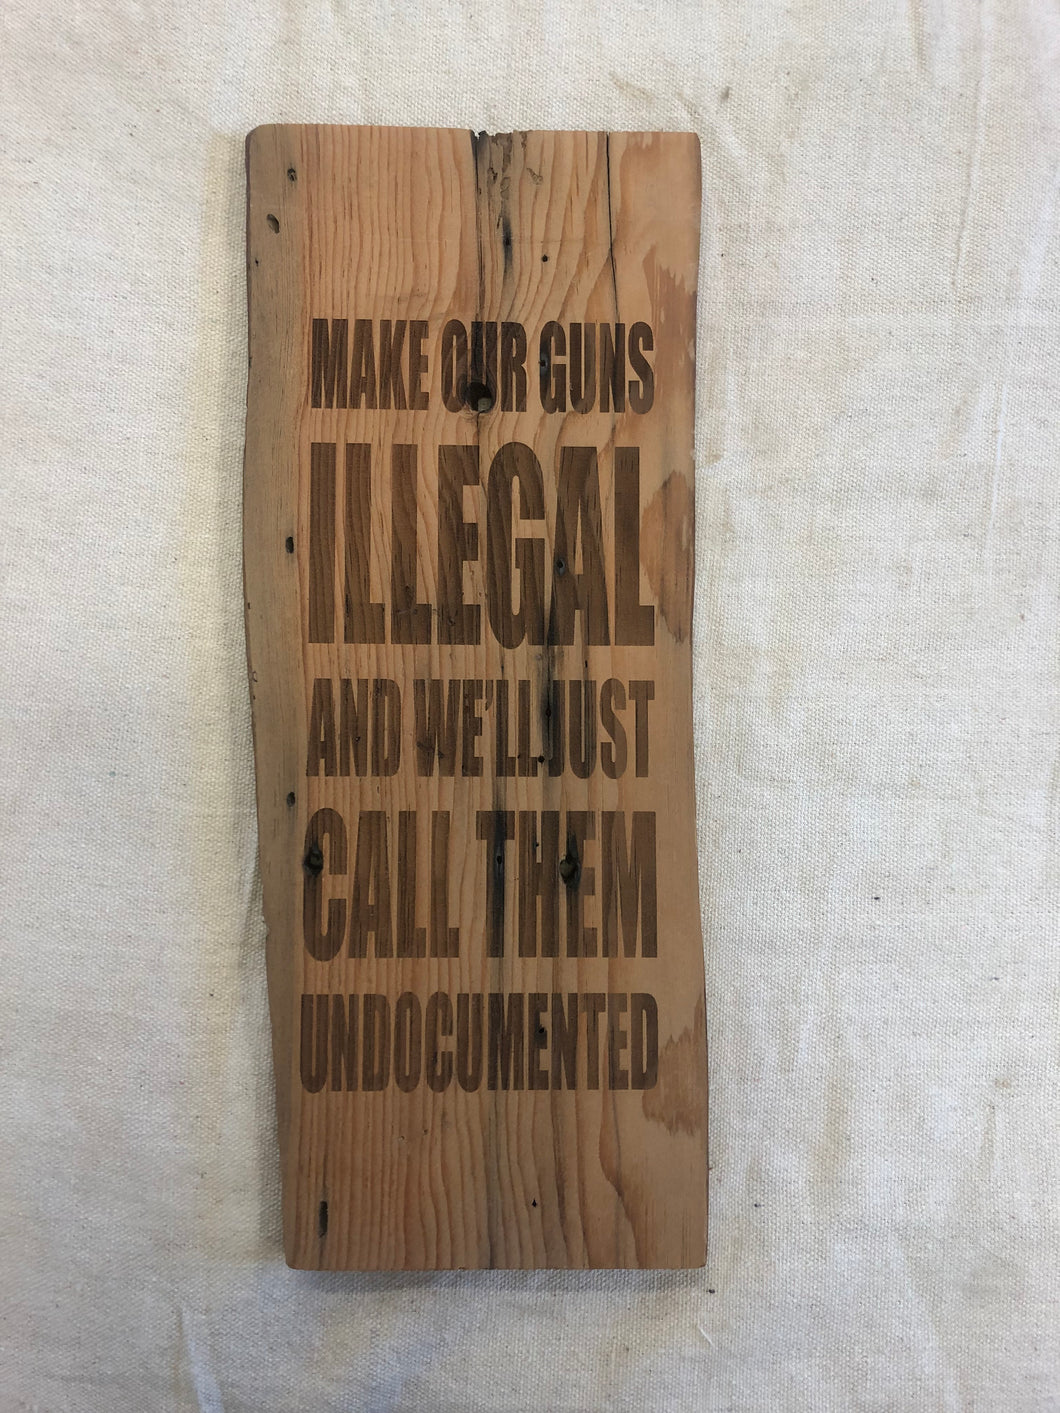 Make our guns Illegal and we'll call them undocumented